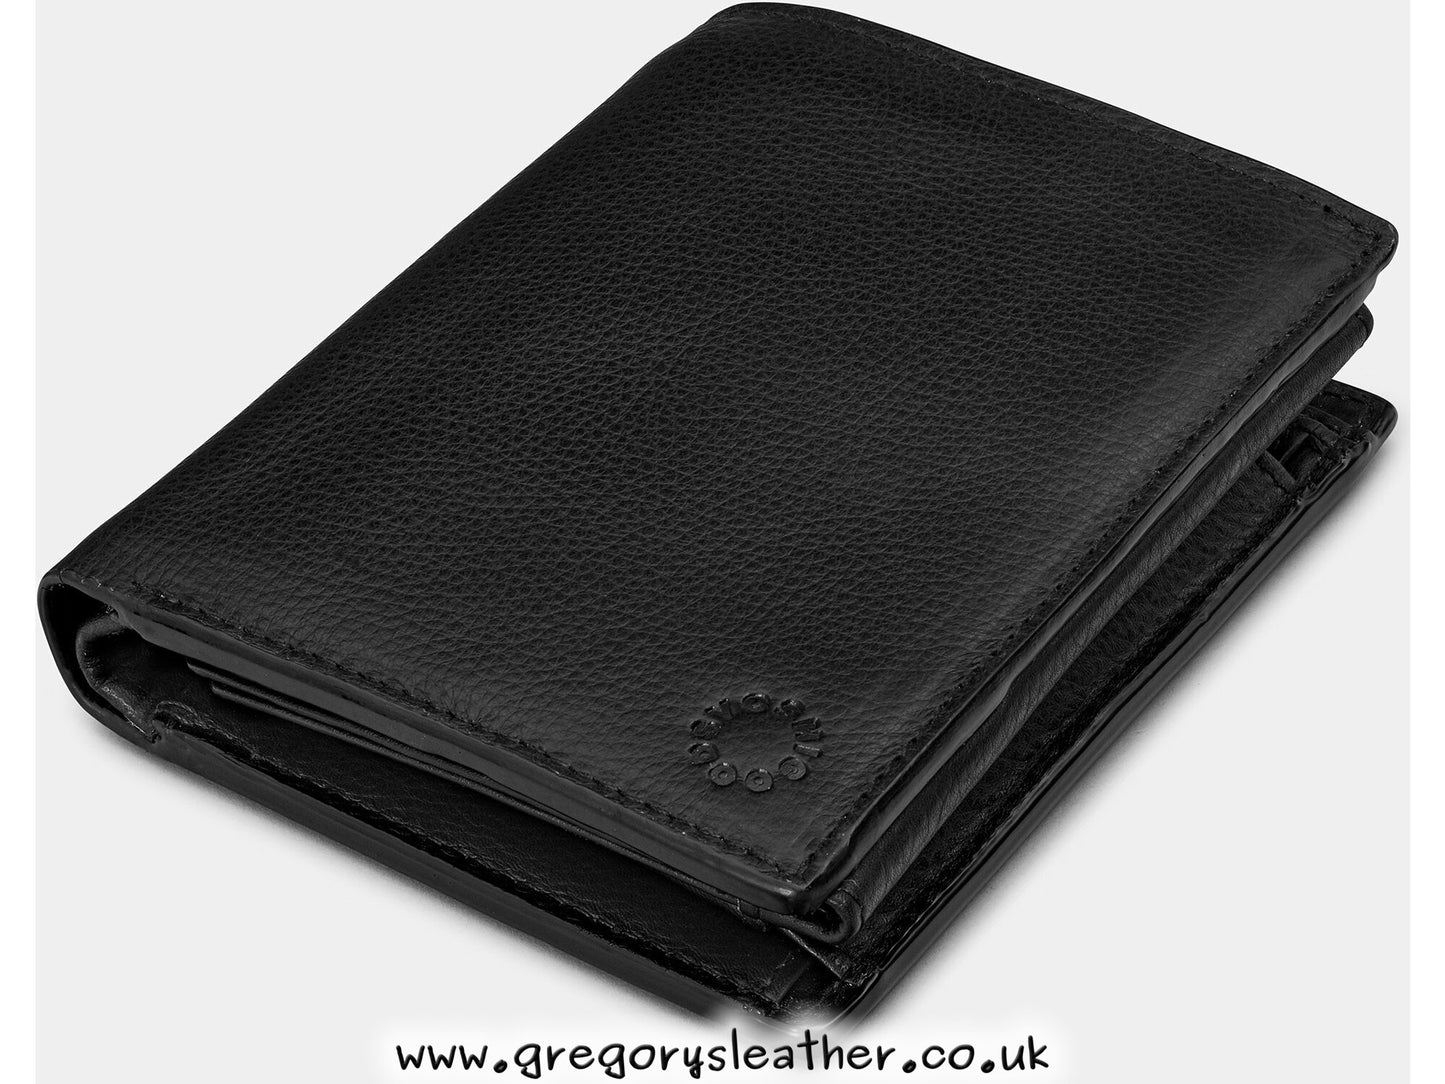 Black Traditional Extra Capacity Leather Wallet by Yoshi